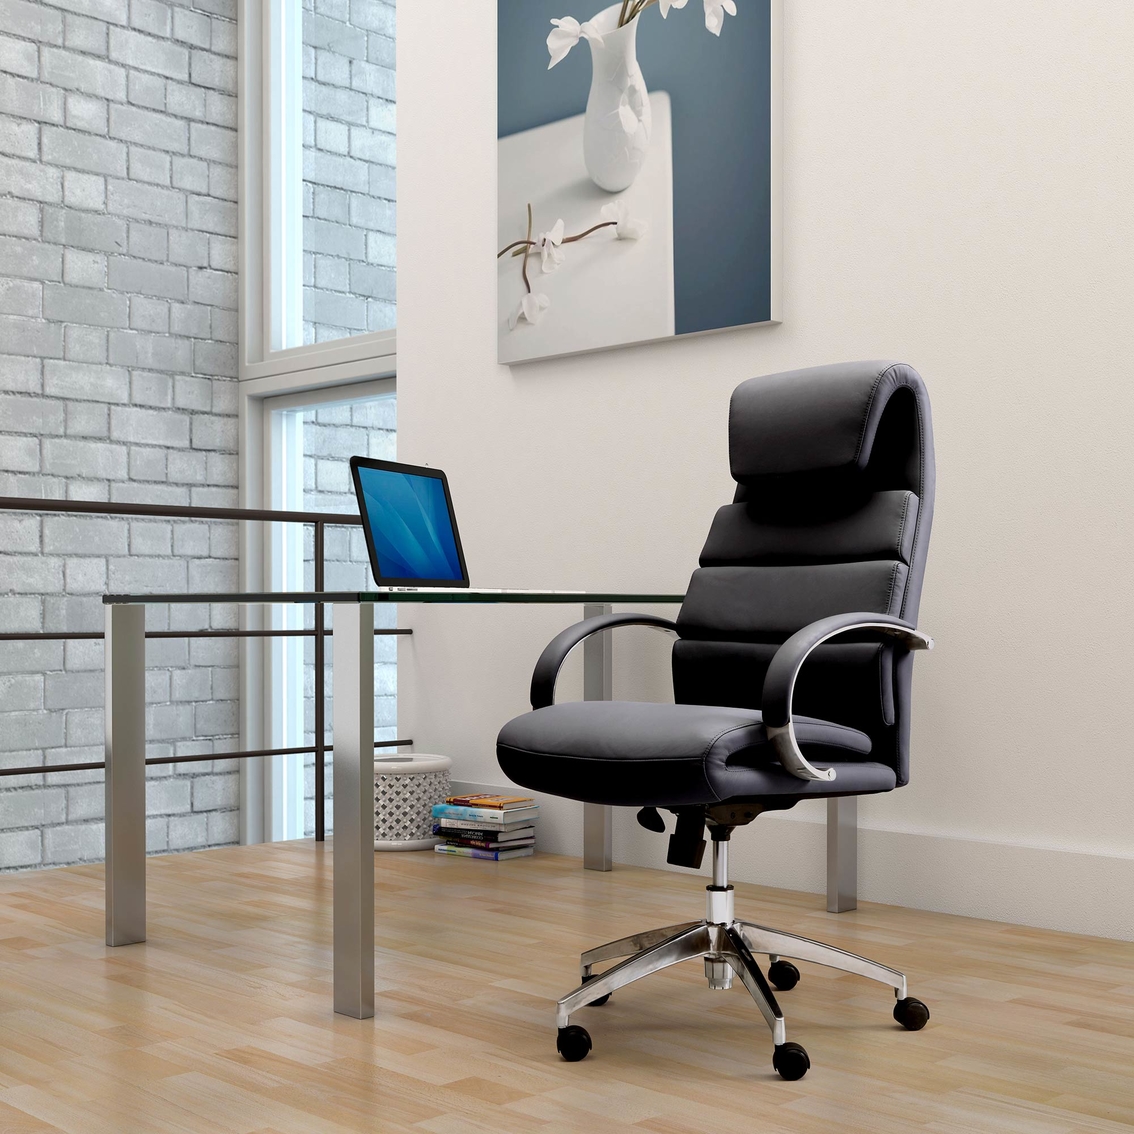 Zuo Lider Comfort Office Chair - Image 4 of 4